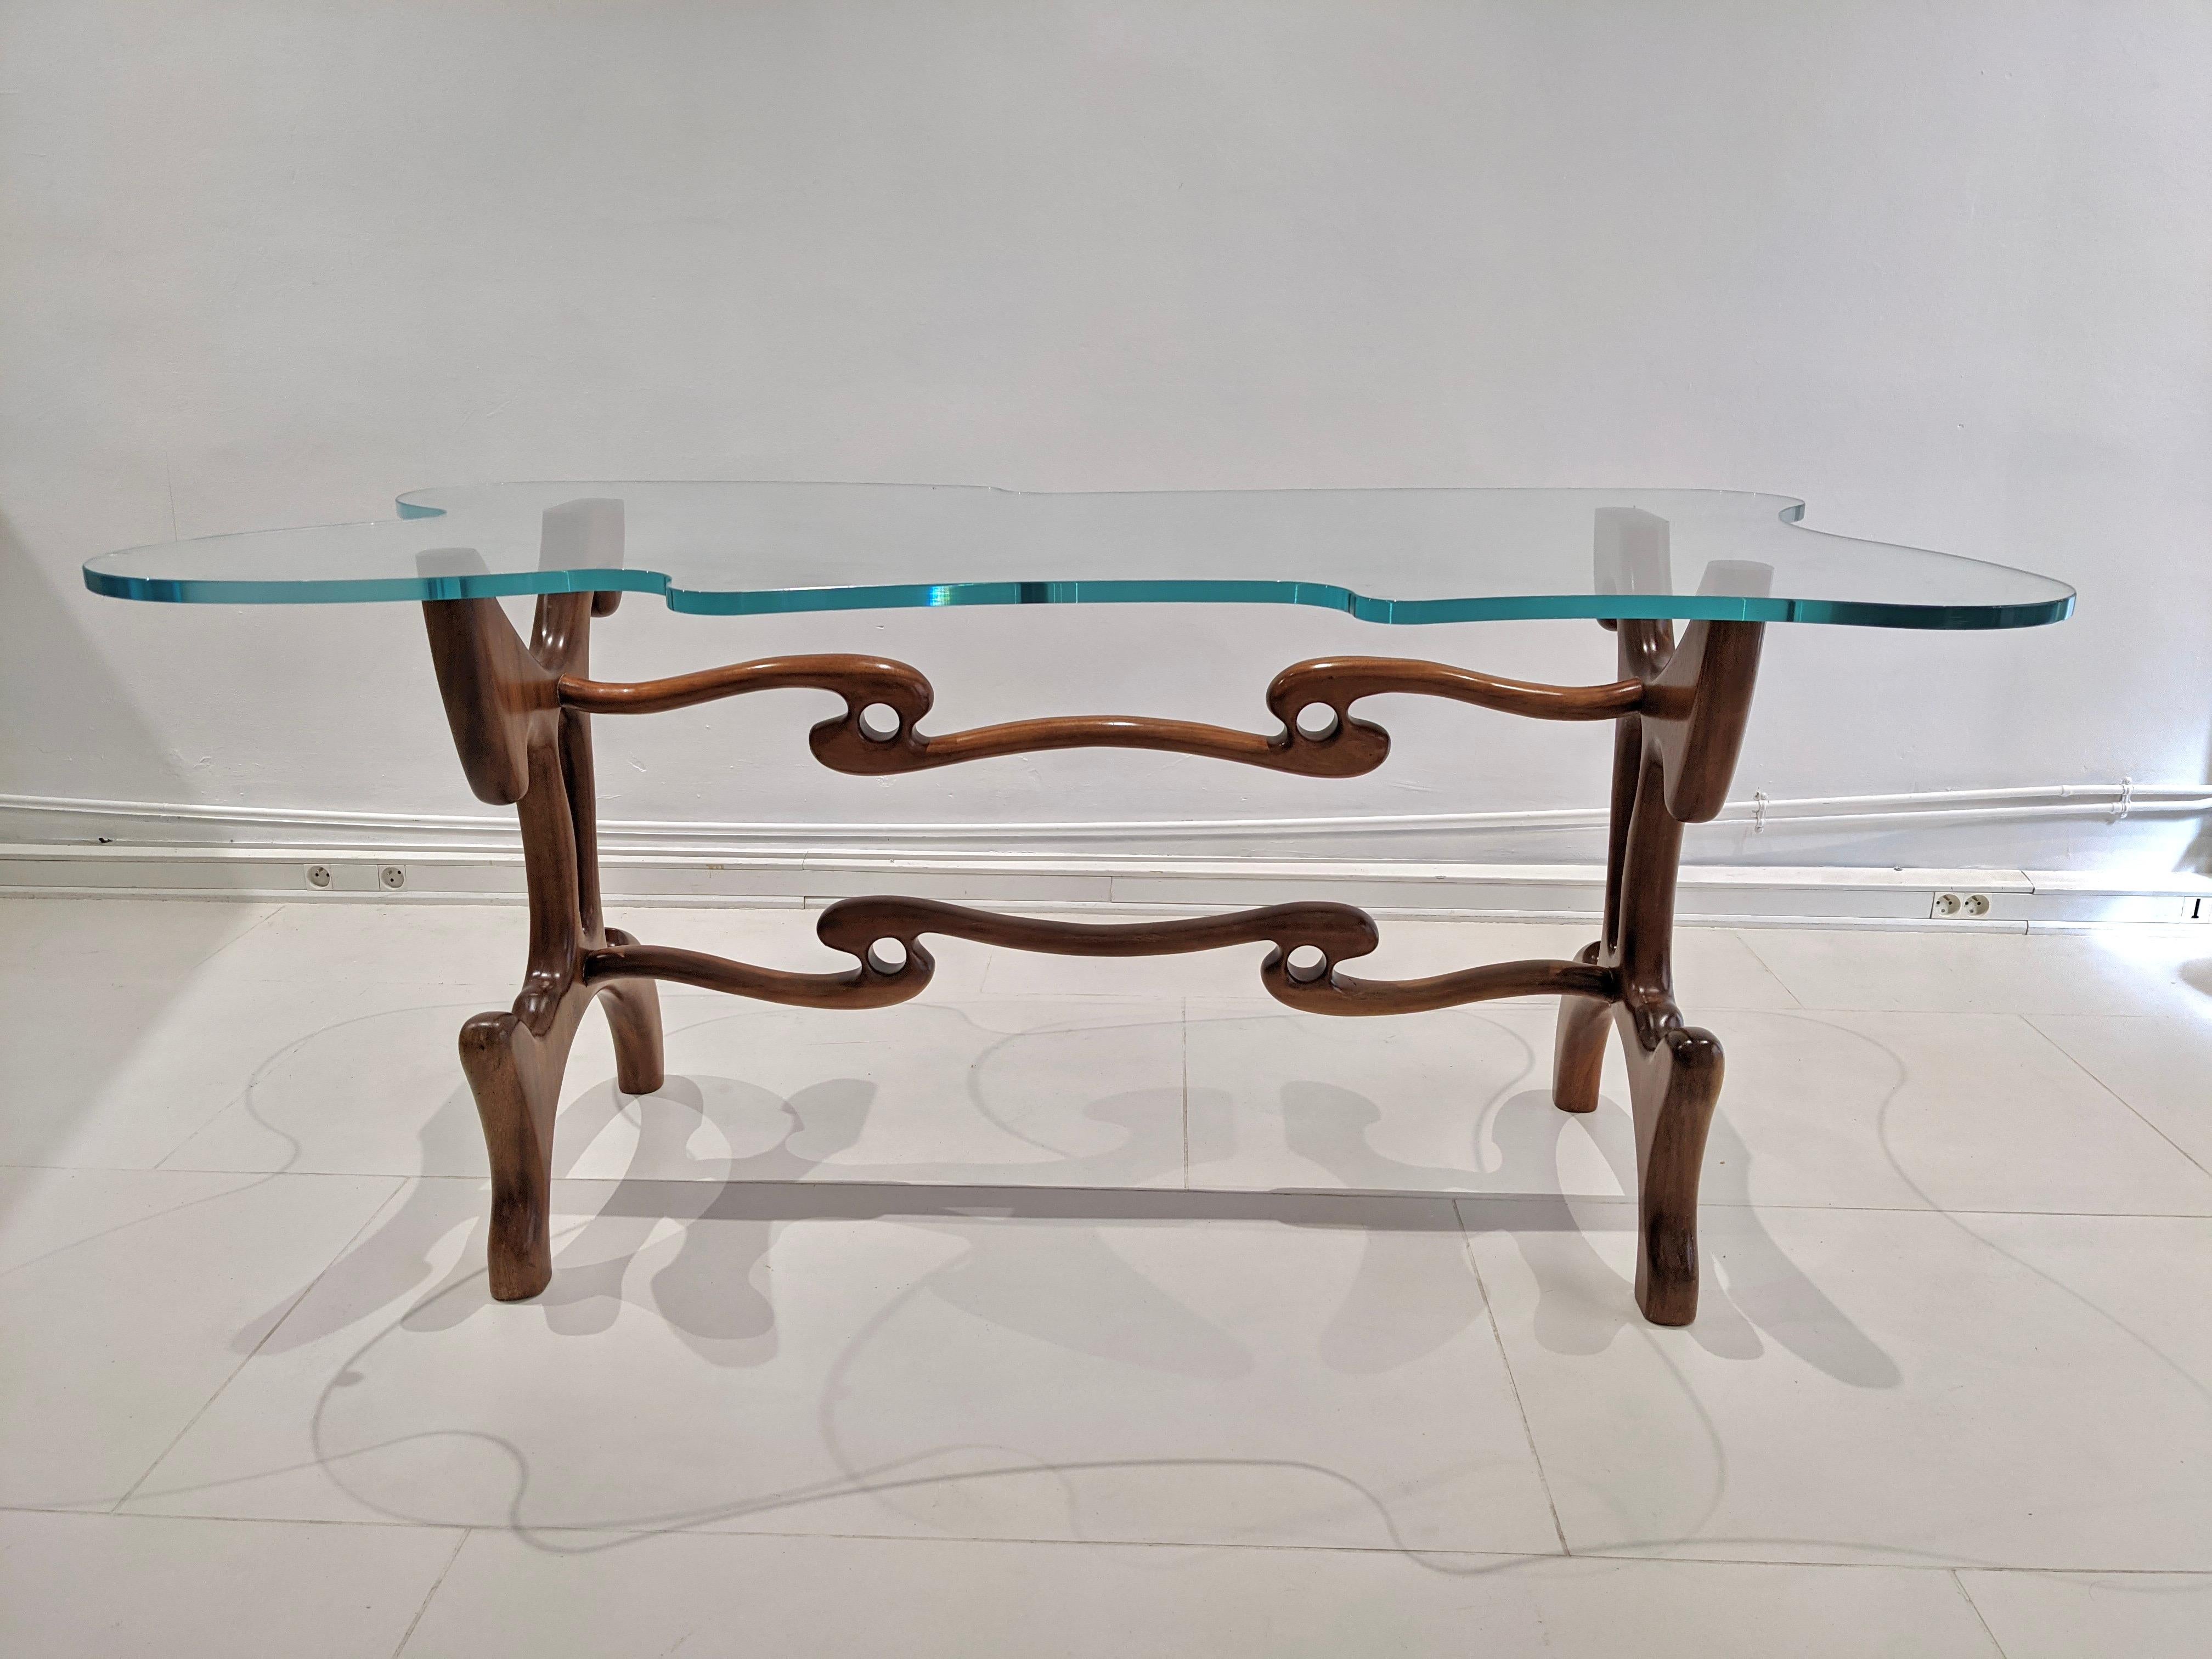 Mahogany table by Paul Laszlo. Glass top. Year 1950. Very good condition.